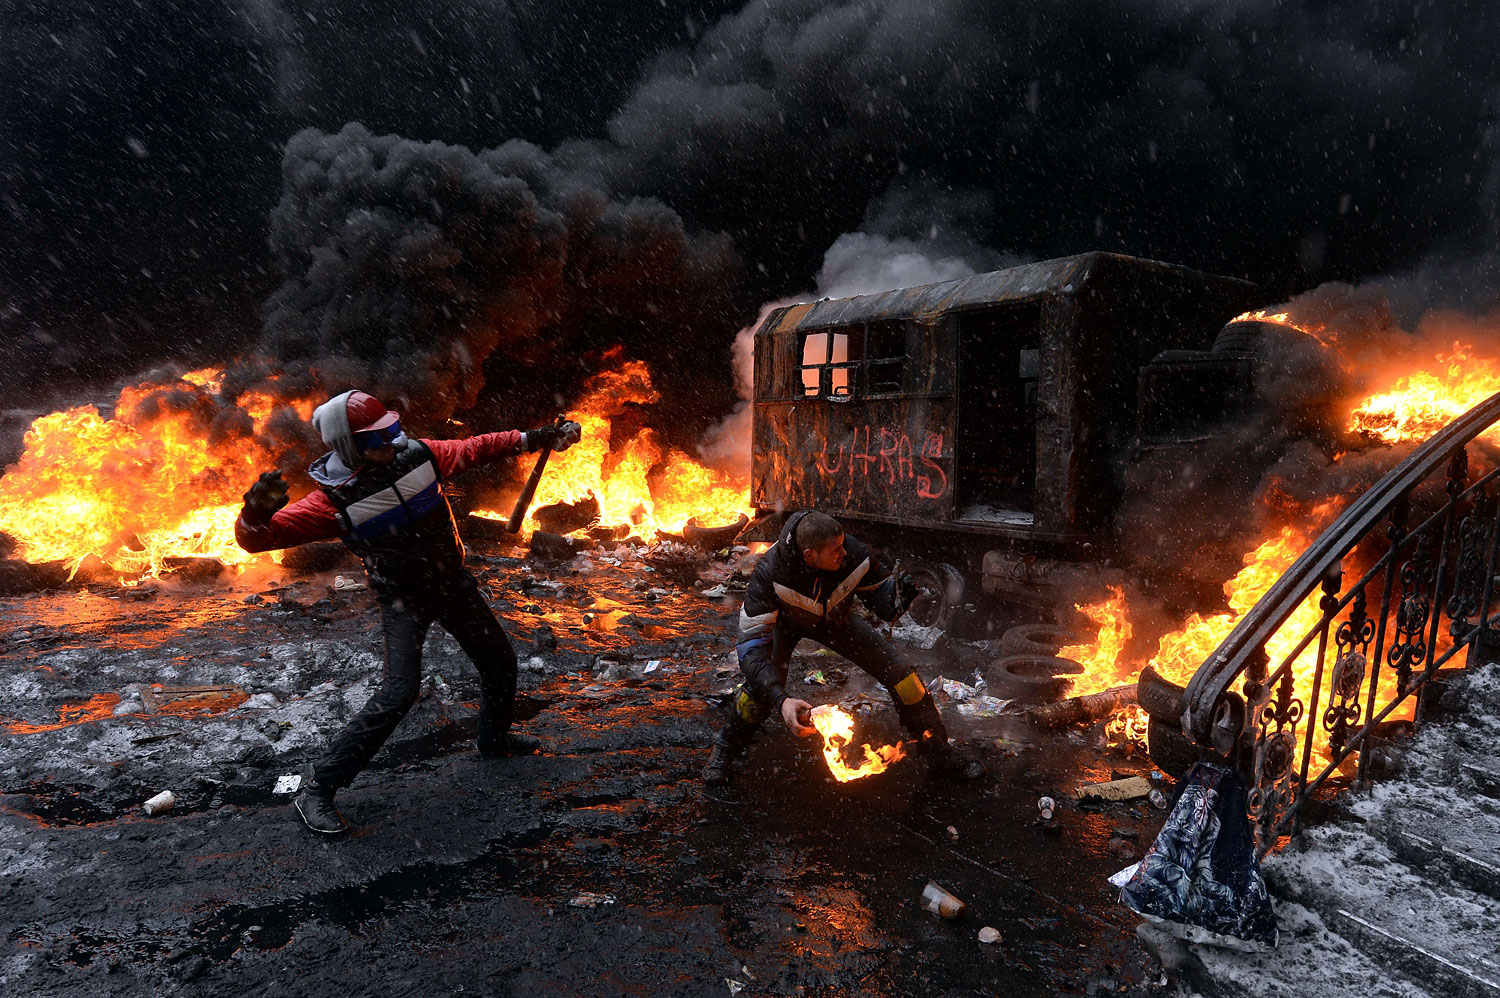 Tires burn in the street, set alight by protesters in clashes with police in central Kiev, Jan. 22, 2014.